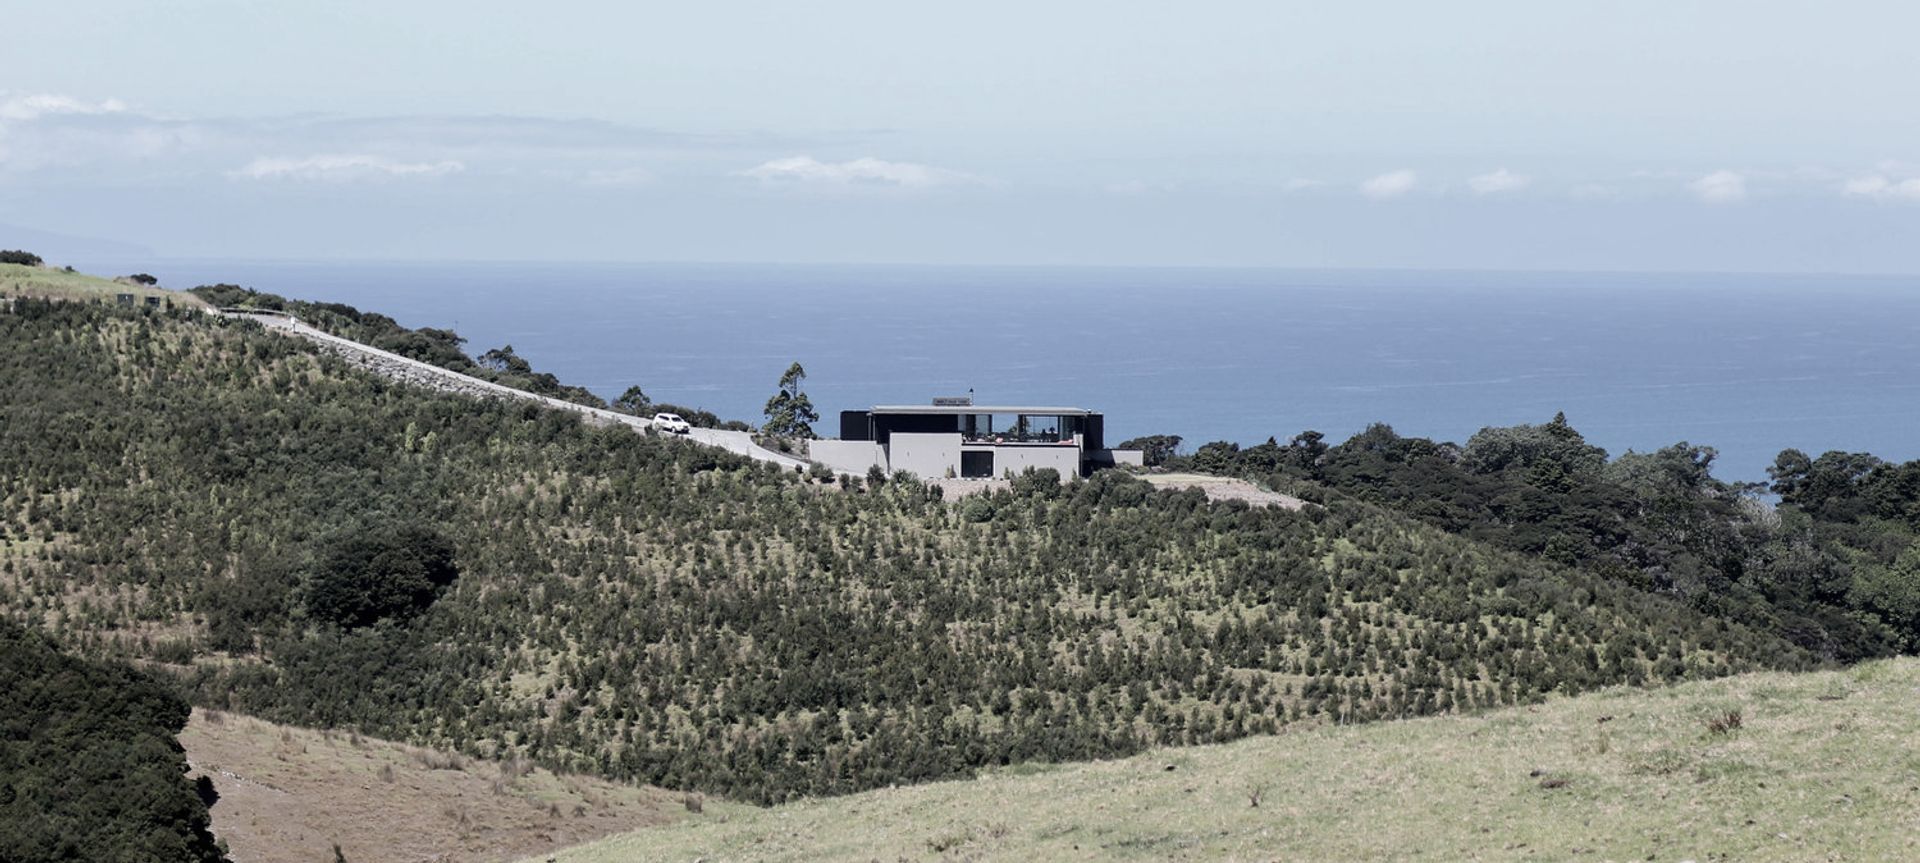 Breamtail House: a coastal idyll banner